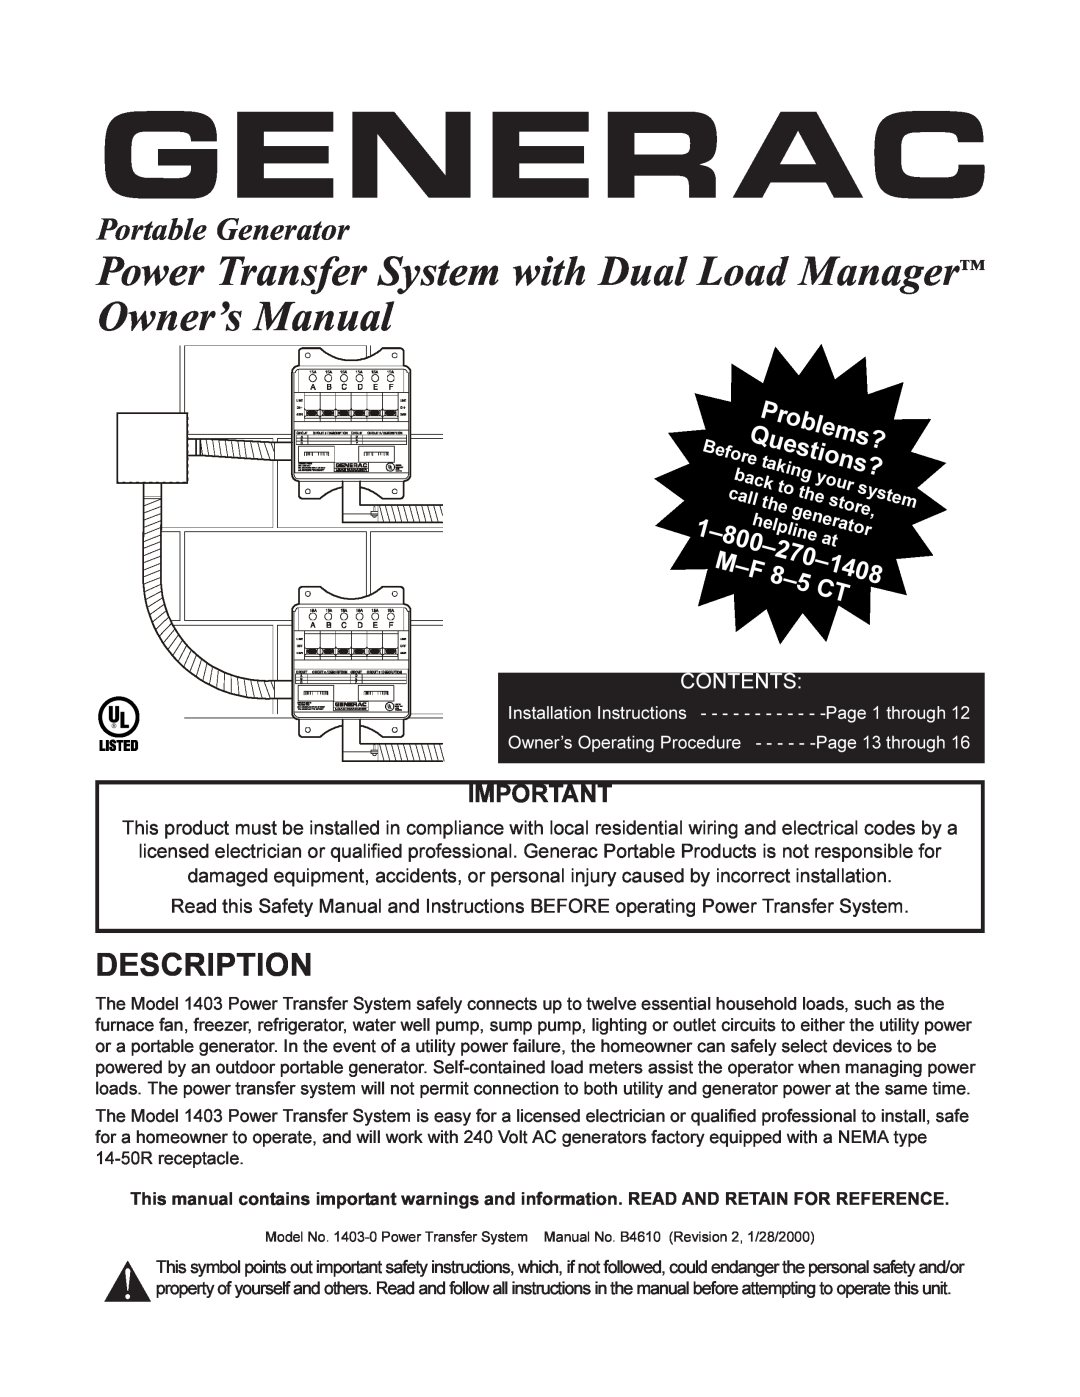 Generac 1403-0 manual Description, Generac, Power Transfer System with Dual Load Manager Owner’s Manual, Problems?, 5 CT 